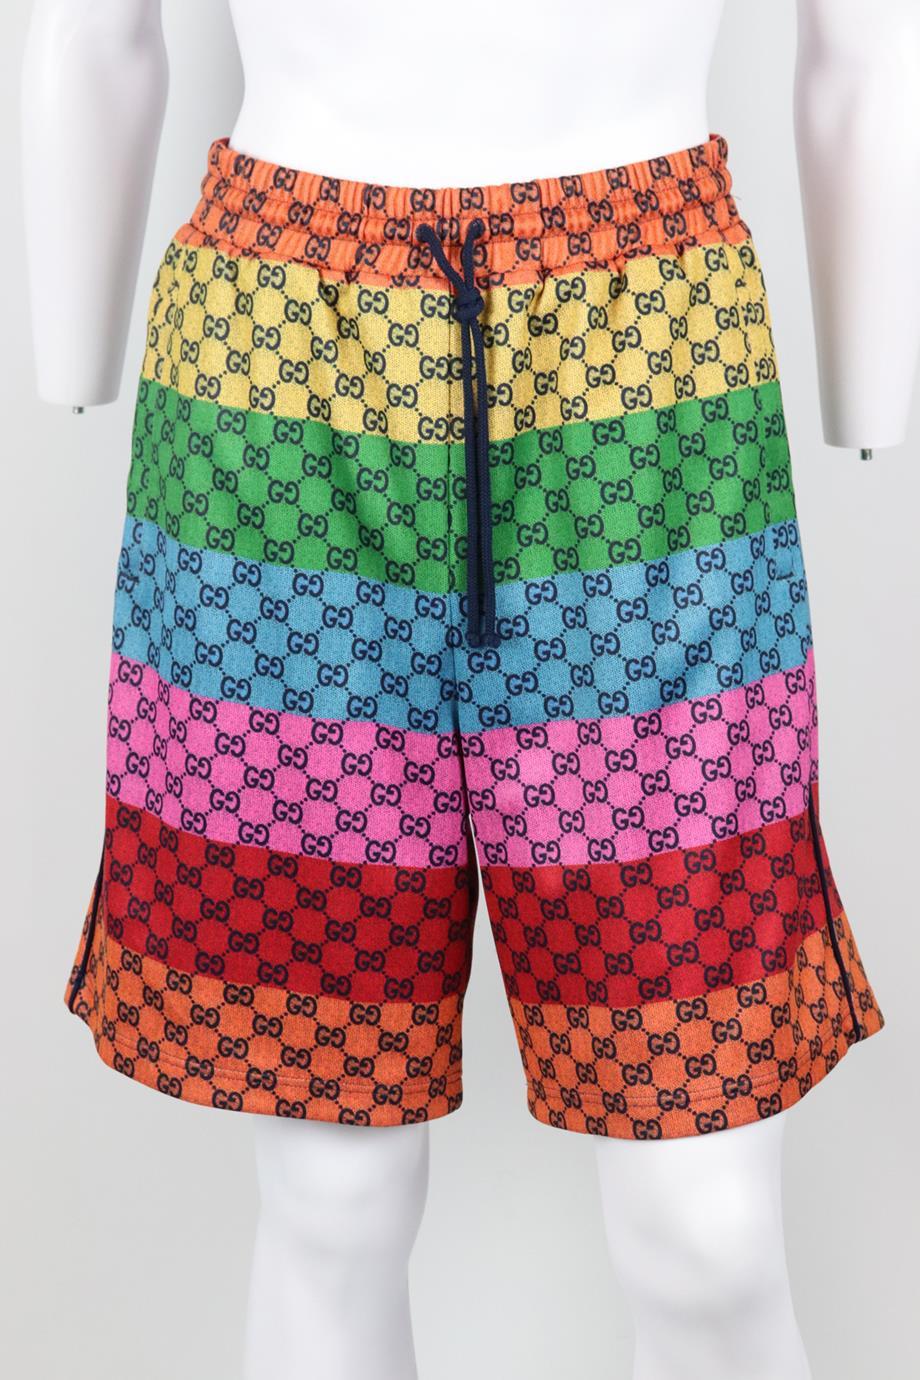 Gucci men's gg jacquard stretch jersey shorts. Multicoloured. Pull on. 55% Polyester, 45% cotton; applications: 100% polyester; lining: 100% polyester. Size: Small (W30, EU 46, UK/US Waist 30). Waist: 28.1 in. Hips: 38 in. Length: 21.8 in. Very good